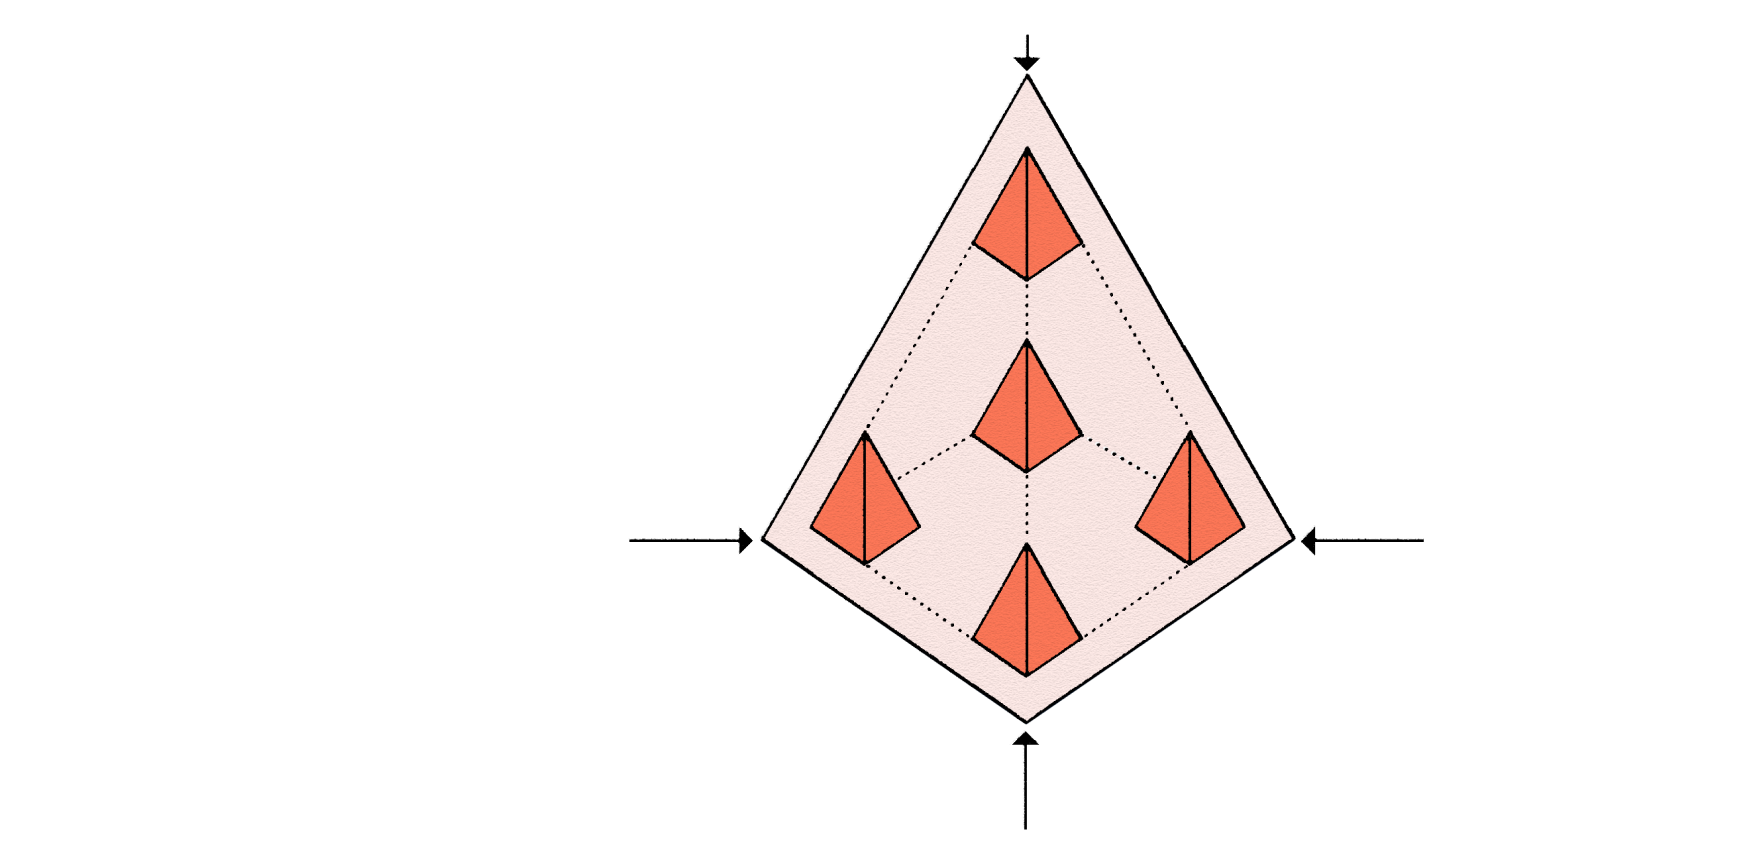 Image showing orange pyramids inside a larger pyramid on clear background